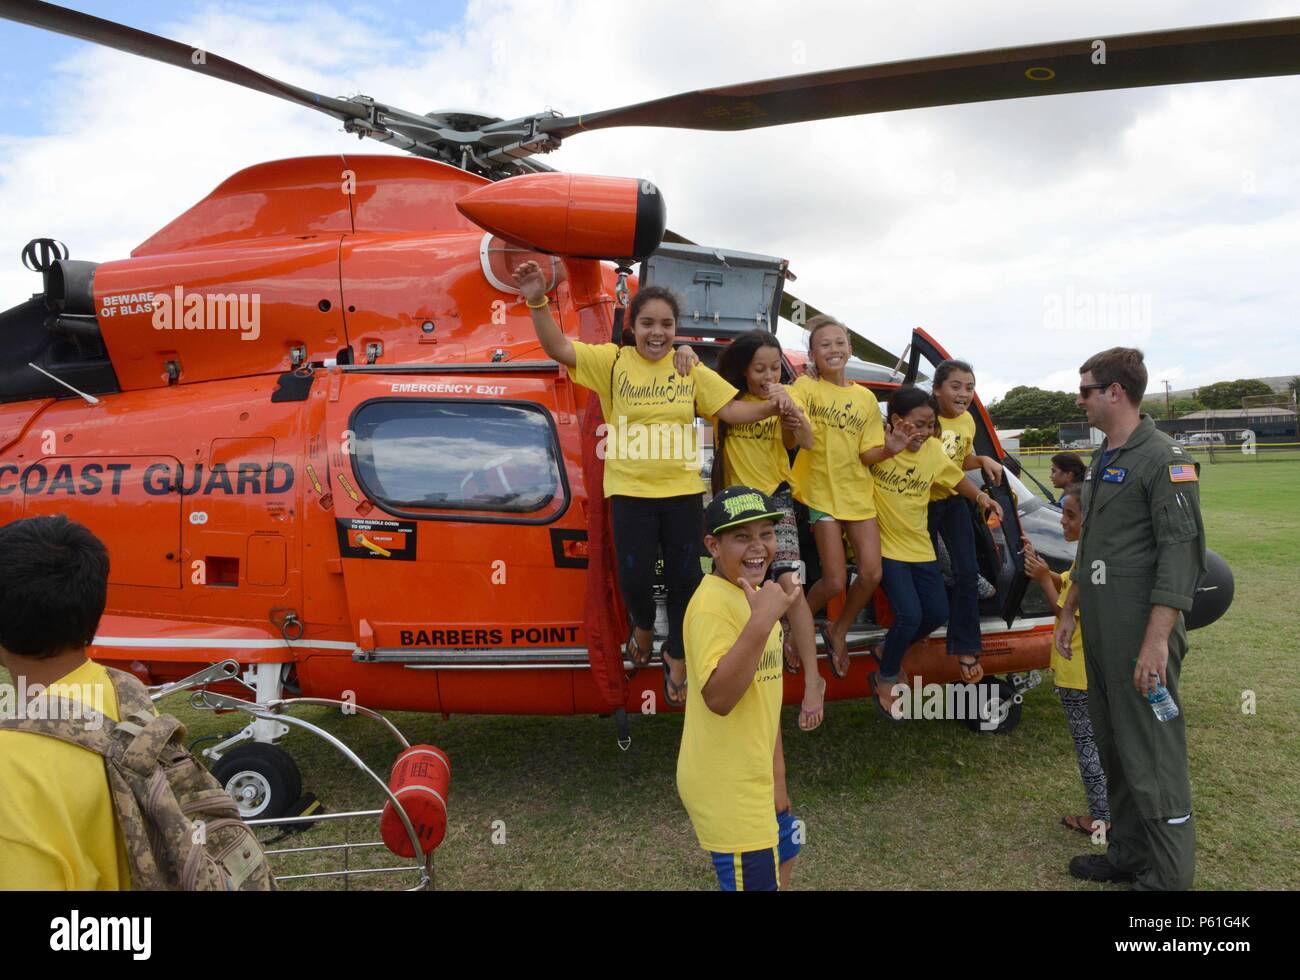 Lt. Jason Gross and several 5th graders from Moanalua Elementary School are all smiles in front of a Coast Guard MH-65 Dolphin helicopter during a D.A.R.E. rally at Kaunakakai Ball Park, Molokai, April 8, 2016. The rally was held to educate the children on the dangers of drugs and also included several static displays and from Coast Guard Air Station Barbers Point and several other first responder agencies. (U.S. Coast Guard photo by Petty Officer 2nd Class Tara Molle/Released) Stock Photo